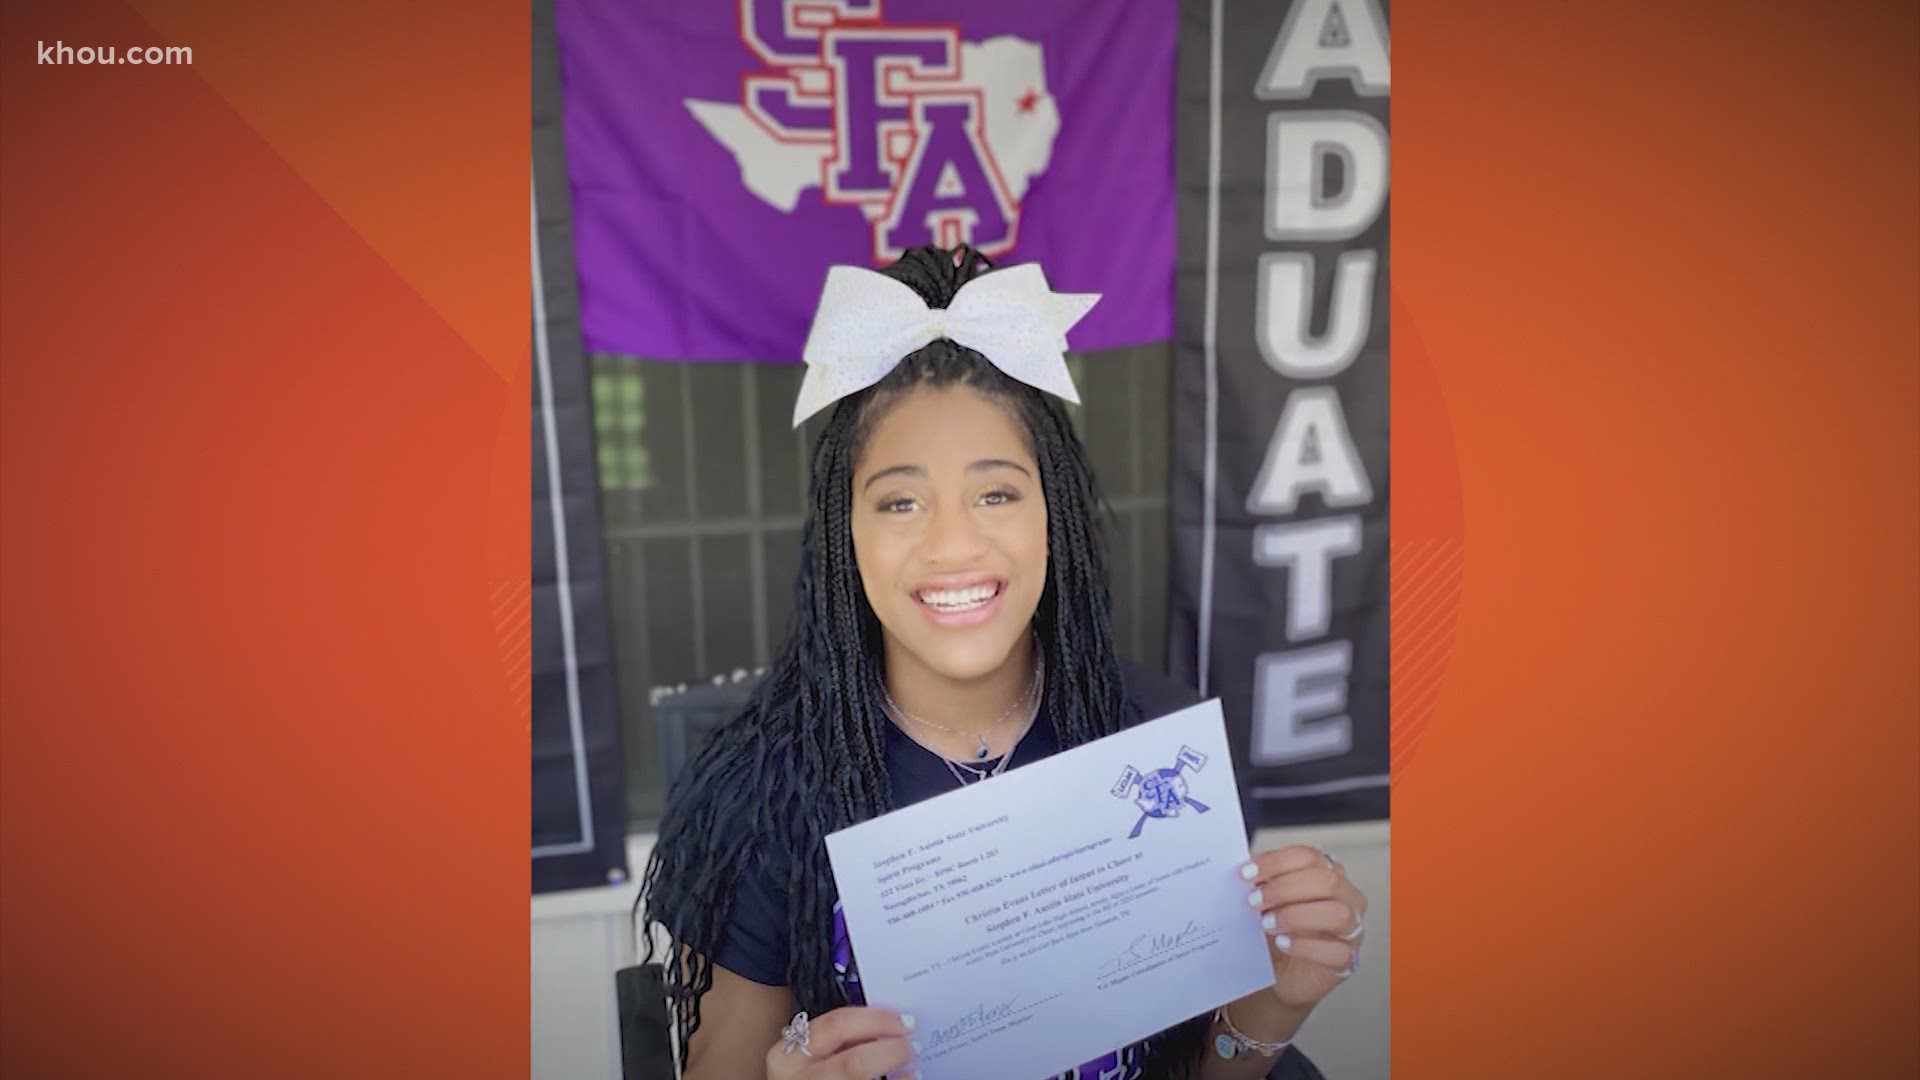 A Stephen F. Austin student claims she was the victim of a "swatting" incident after a false police report was filed against her by her roommates and several others.